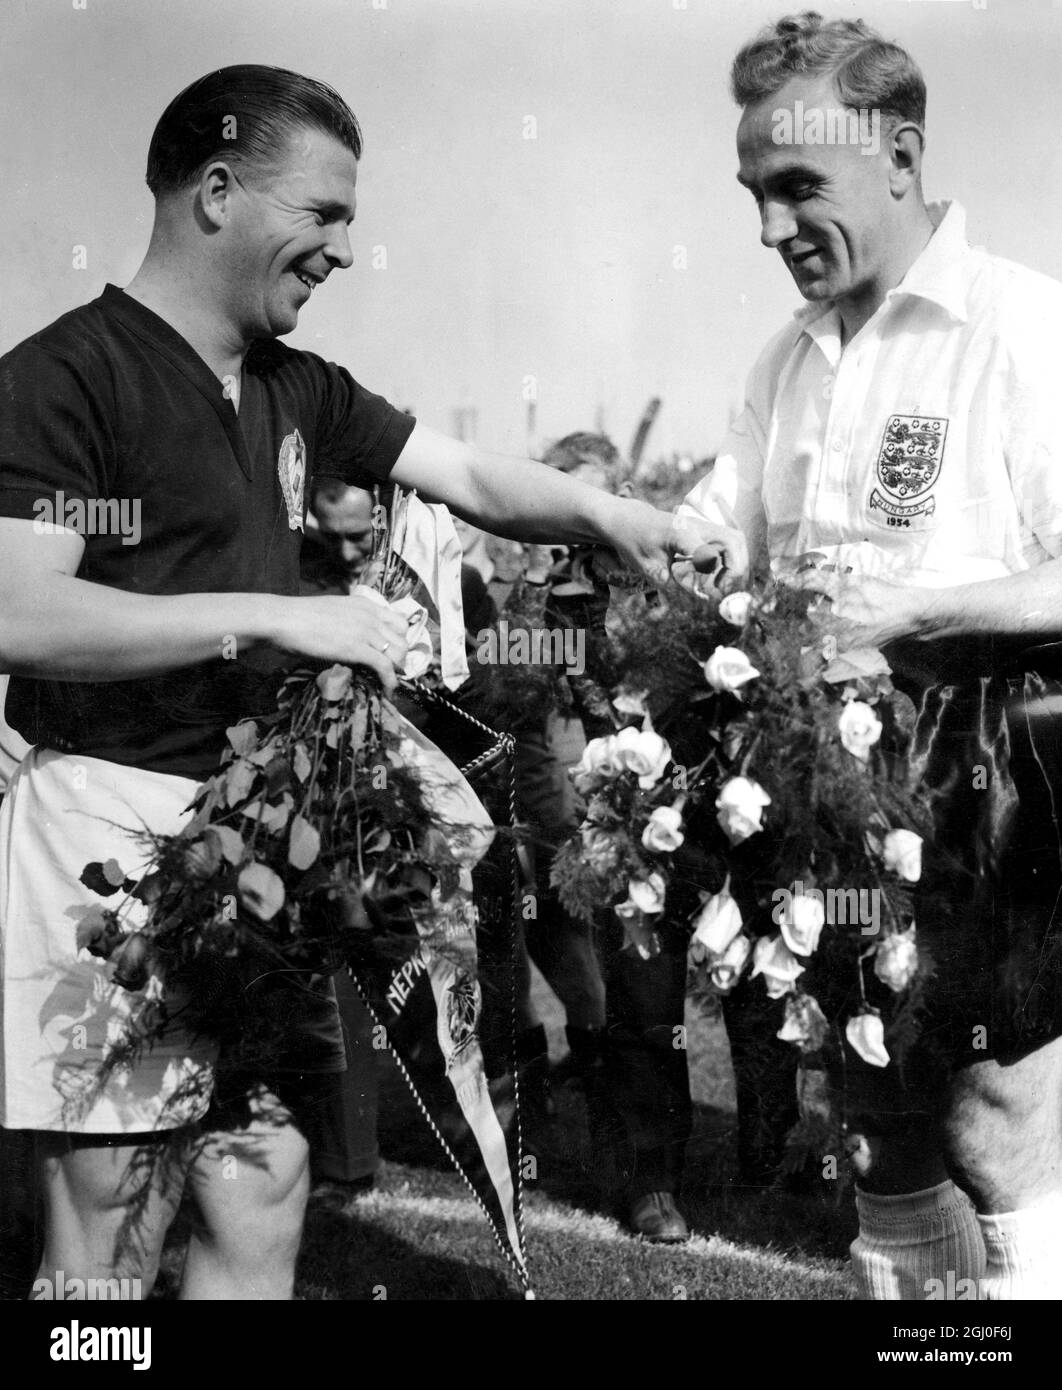 Bouquets are exchanged by the two captains before the start of the Hungary v England International match in the People's Stadium. They are Billy Wright (right) and Ferenc Puskas. The Hungarians by winning 7-1 dealt English soccer its biggest defeat at the hands of the continental side. 24th May 1954. Stock Photo